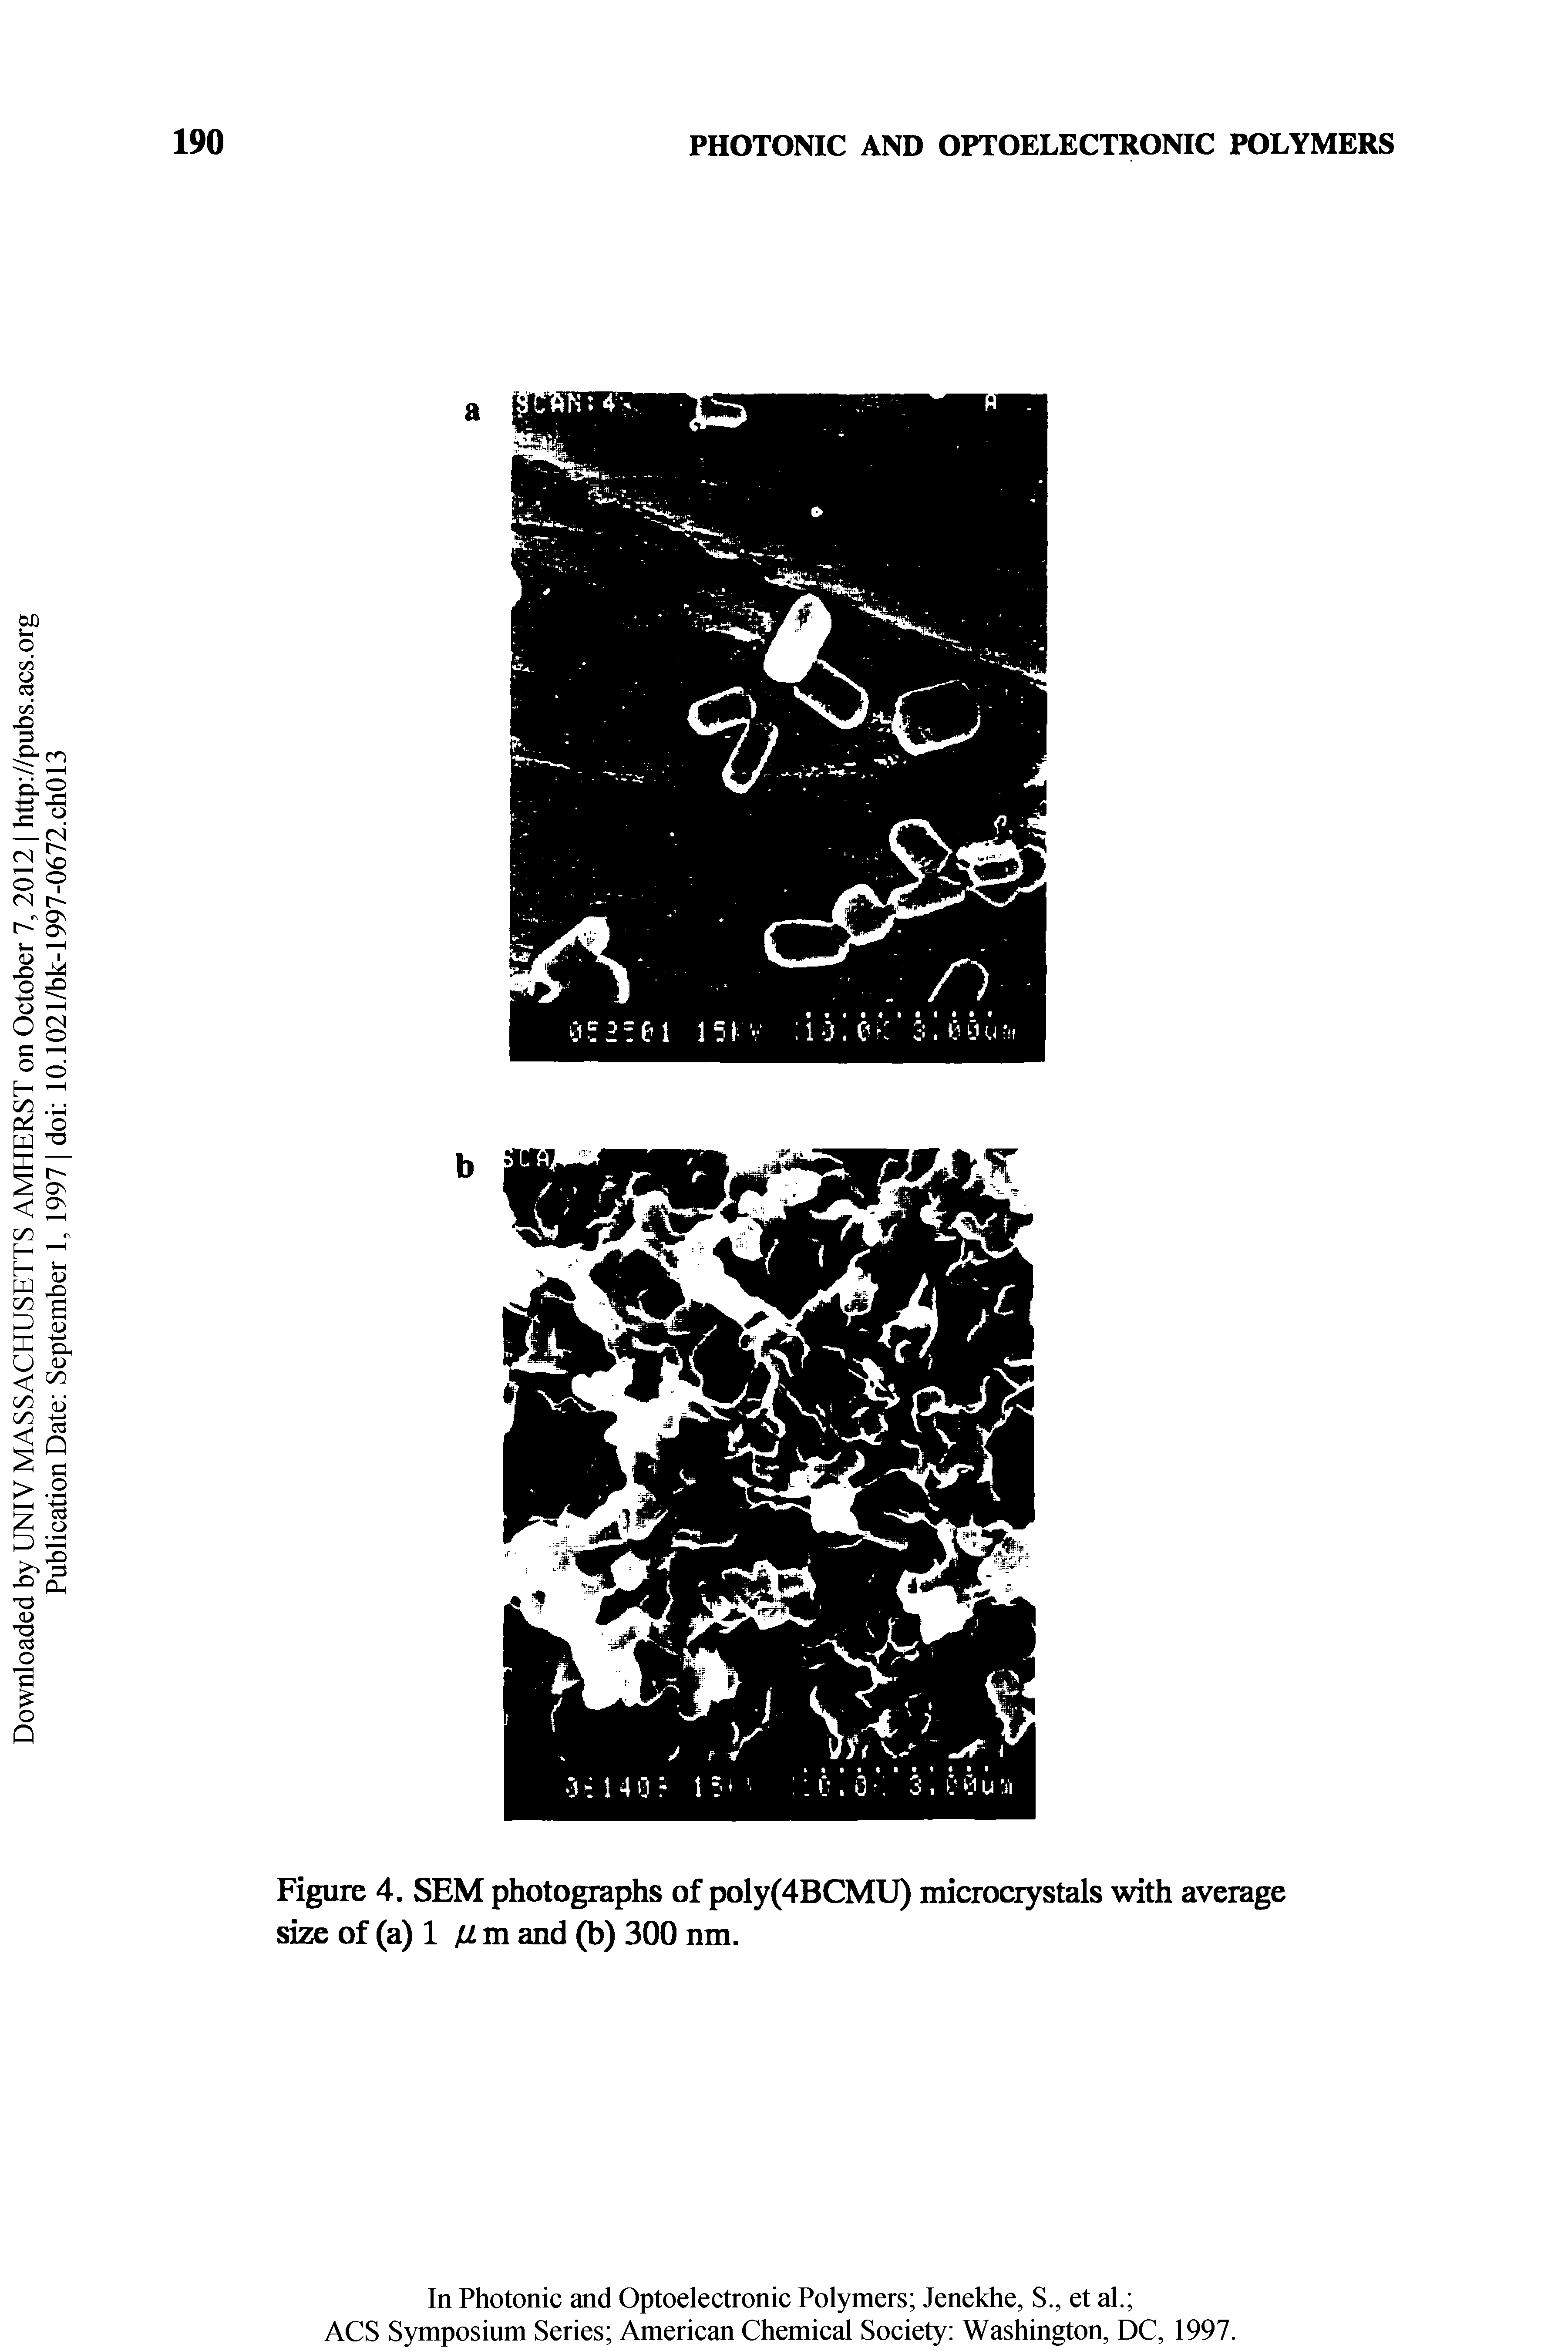 Figure 4. SEM photographs of poly(4BCMU) microcrystals with average size of (a) 1 fim. and (b) 300 nm.